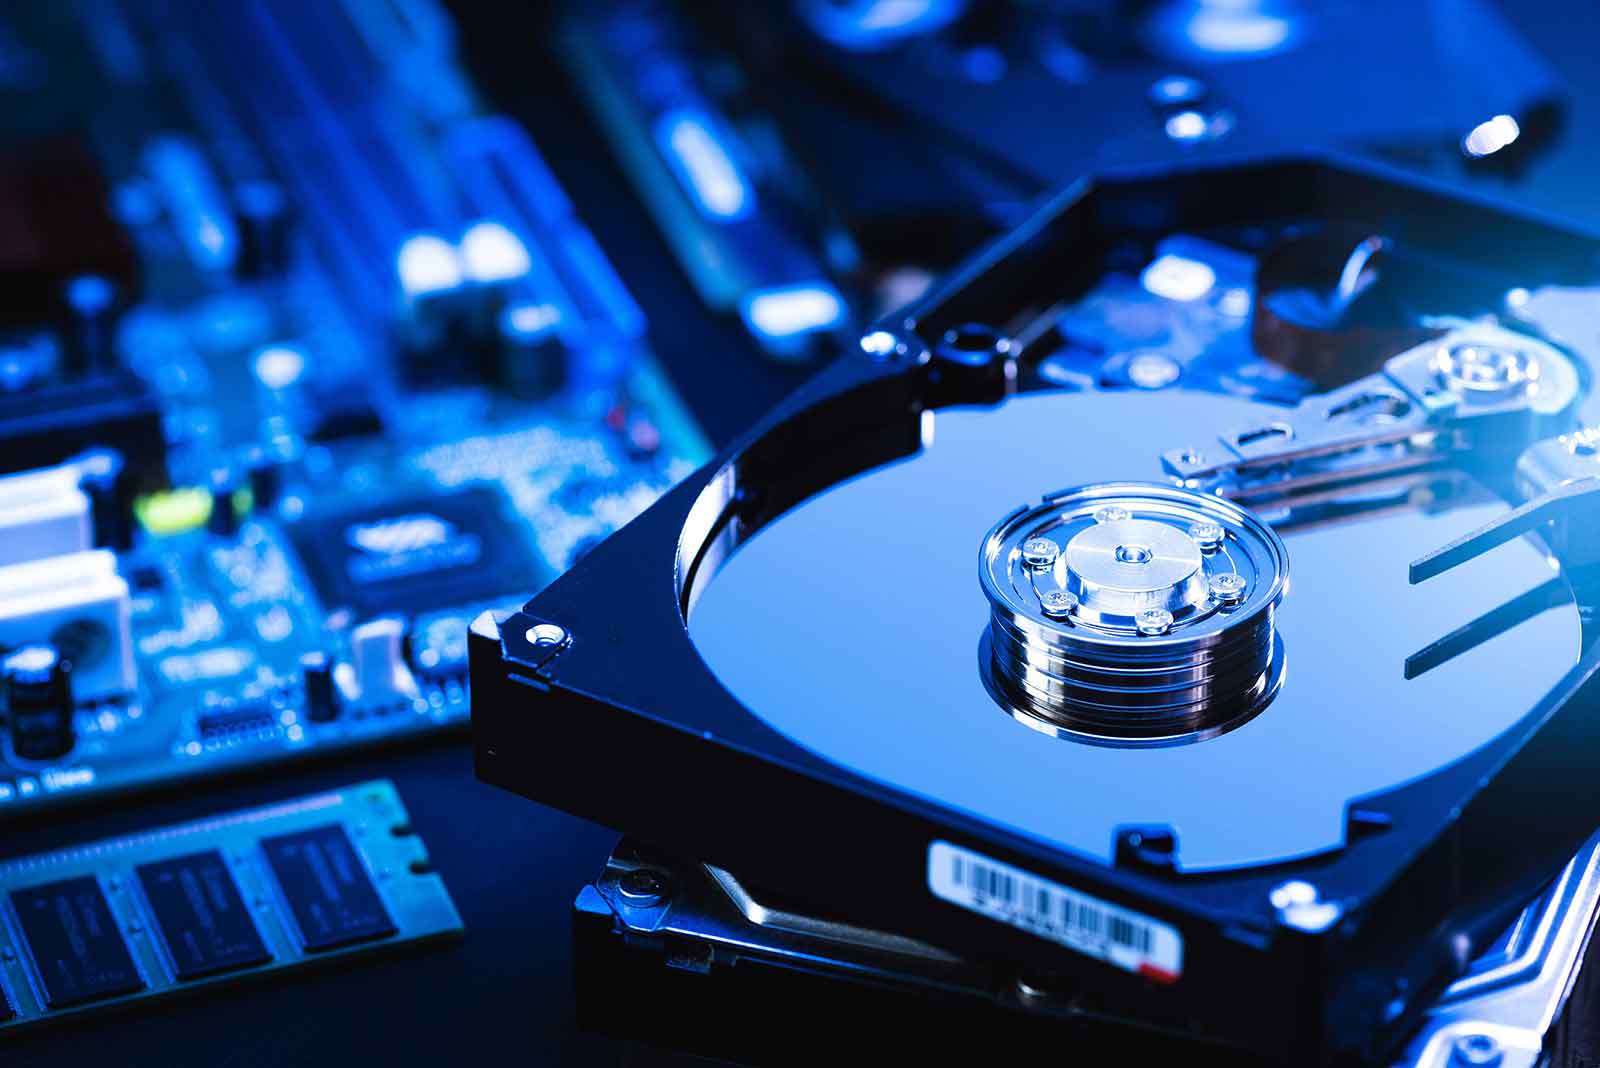 Can You Data Recovery Services From A Failed SSD?